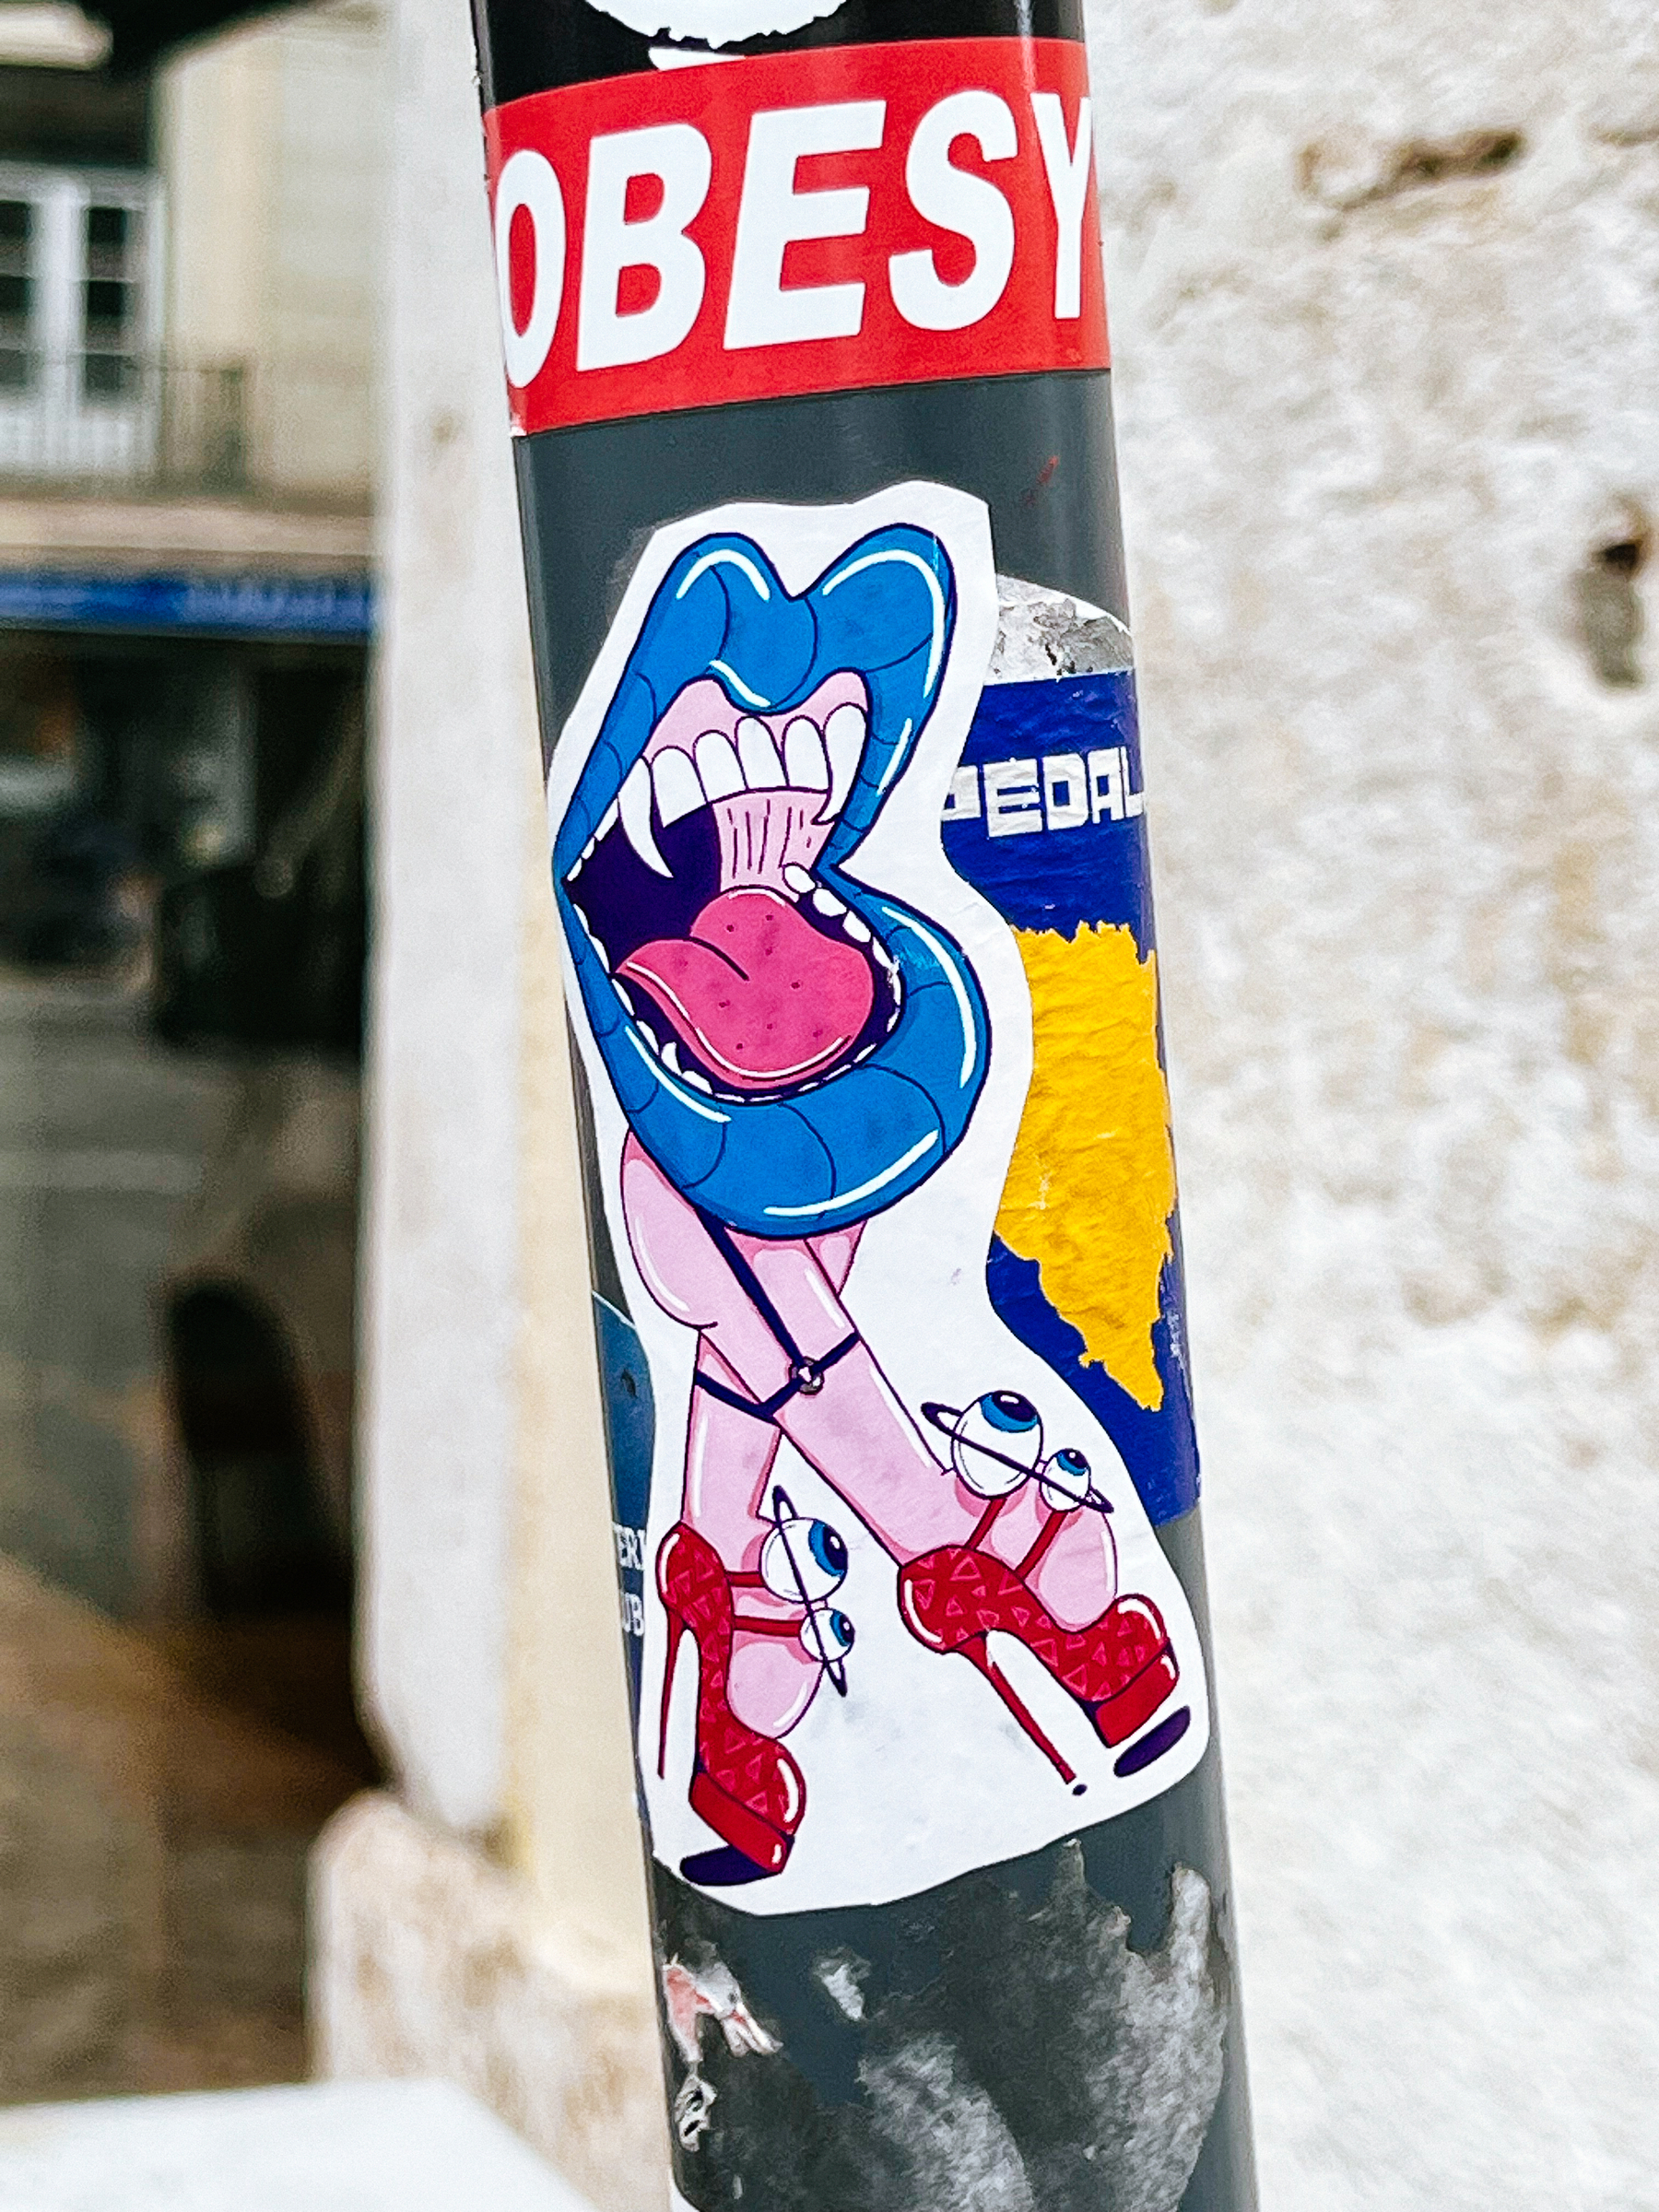 Sticker with cartoon style design. A mouth with fangs, and blue lips. Beneath it a pair of legs, wearing red high heel shoes. The shoes have eyes on the straps. 